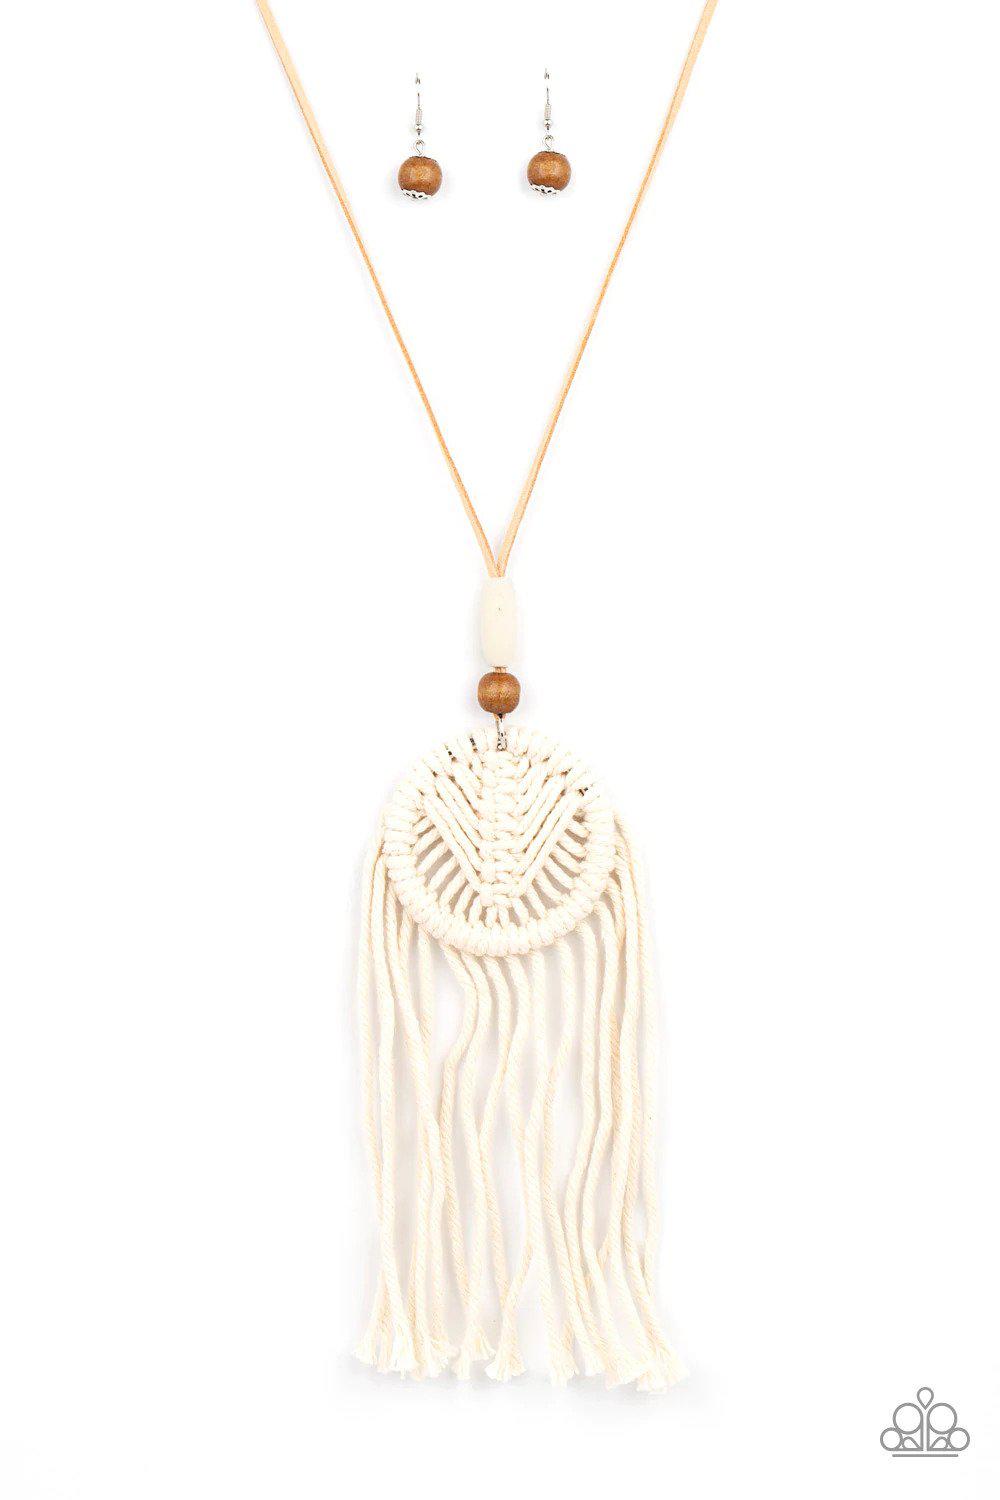 Desert Dreamscape Brown Necklace - Paparazzi Accessories- lightbox - CarasShop.com - $5 Jewelry by Cara Jewels